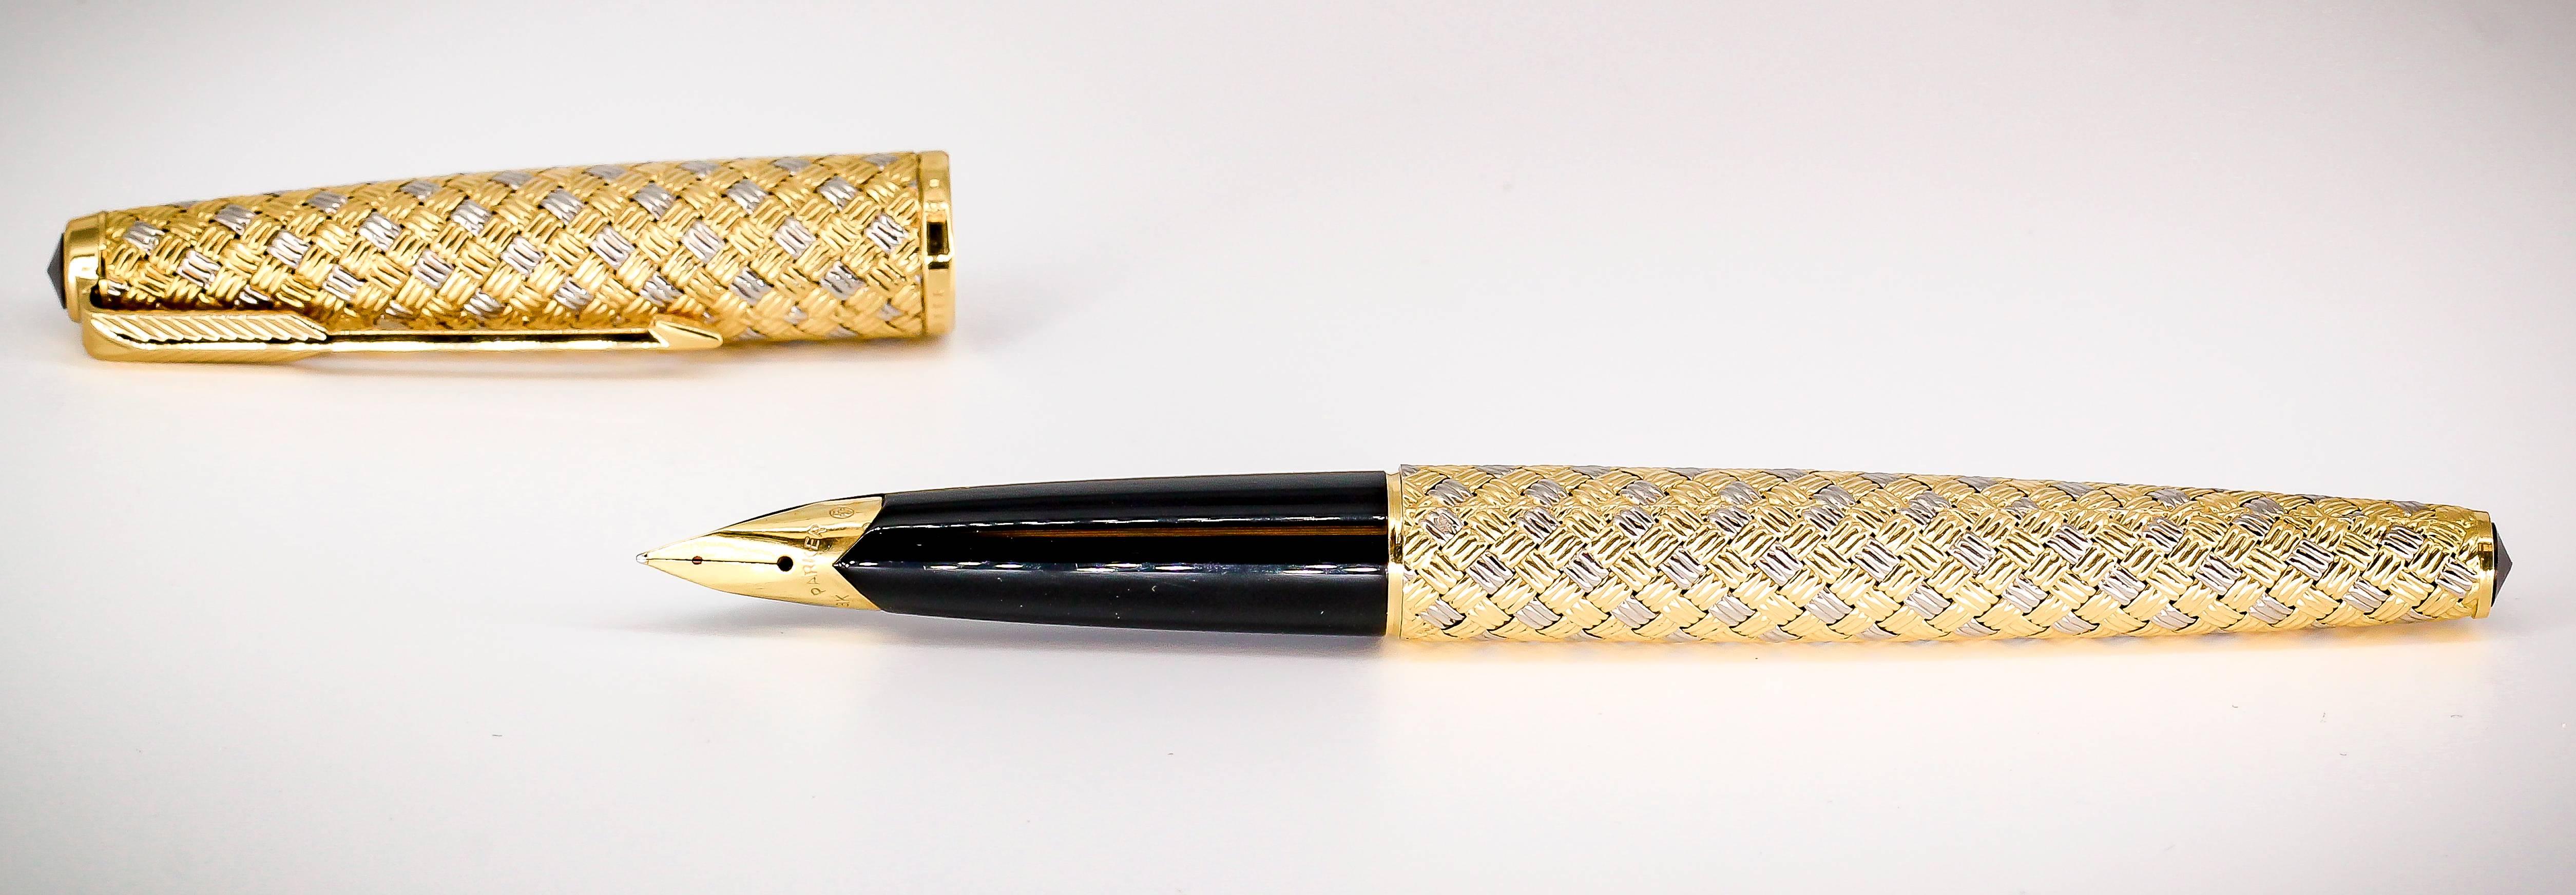 Elegant 18K white and yellow gold fountain pen by Boucheron. It features an intricate basketweave design. Beautiful workmanship and easy to use, carry, or give as a gift.

Hallmarks: Boucheron, Parker, Paris, French 18K gold assay mark.